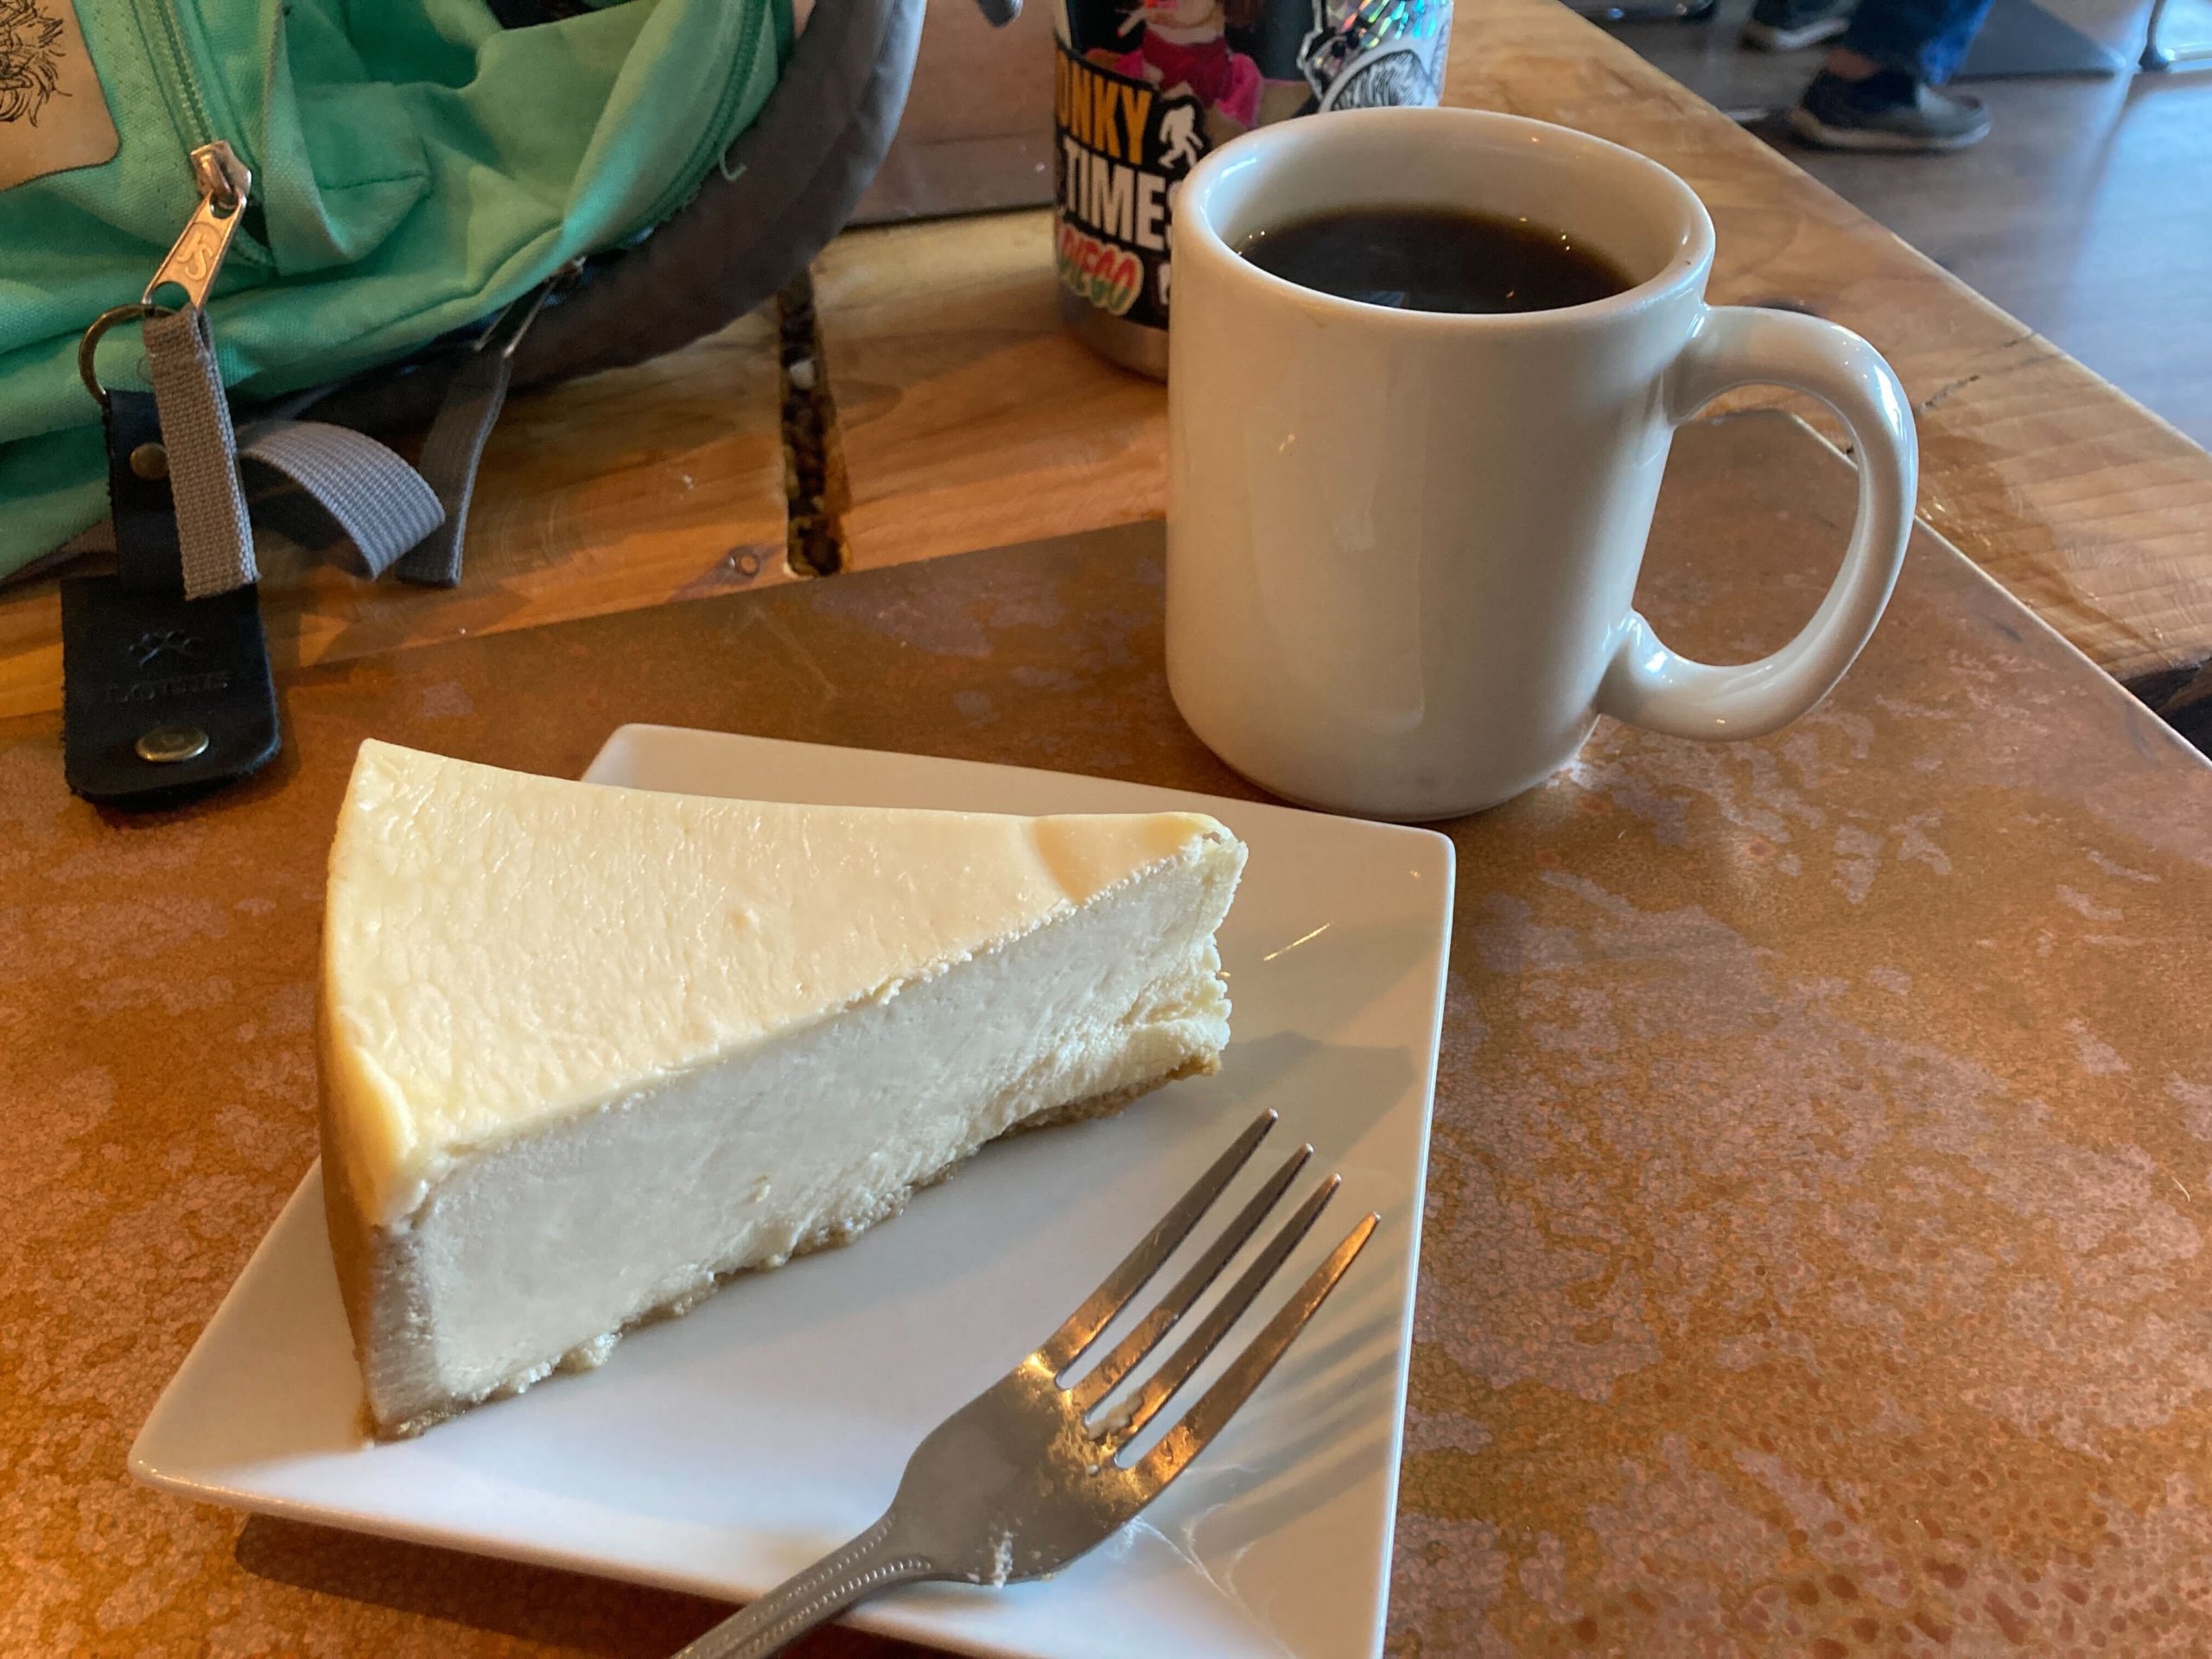 Cheesecake and coffee at Crave Coffee (Photo by Matt Sterner)